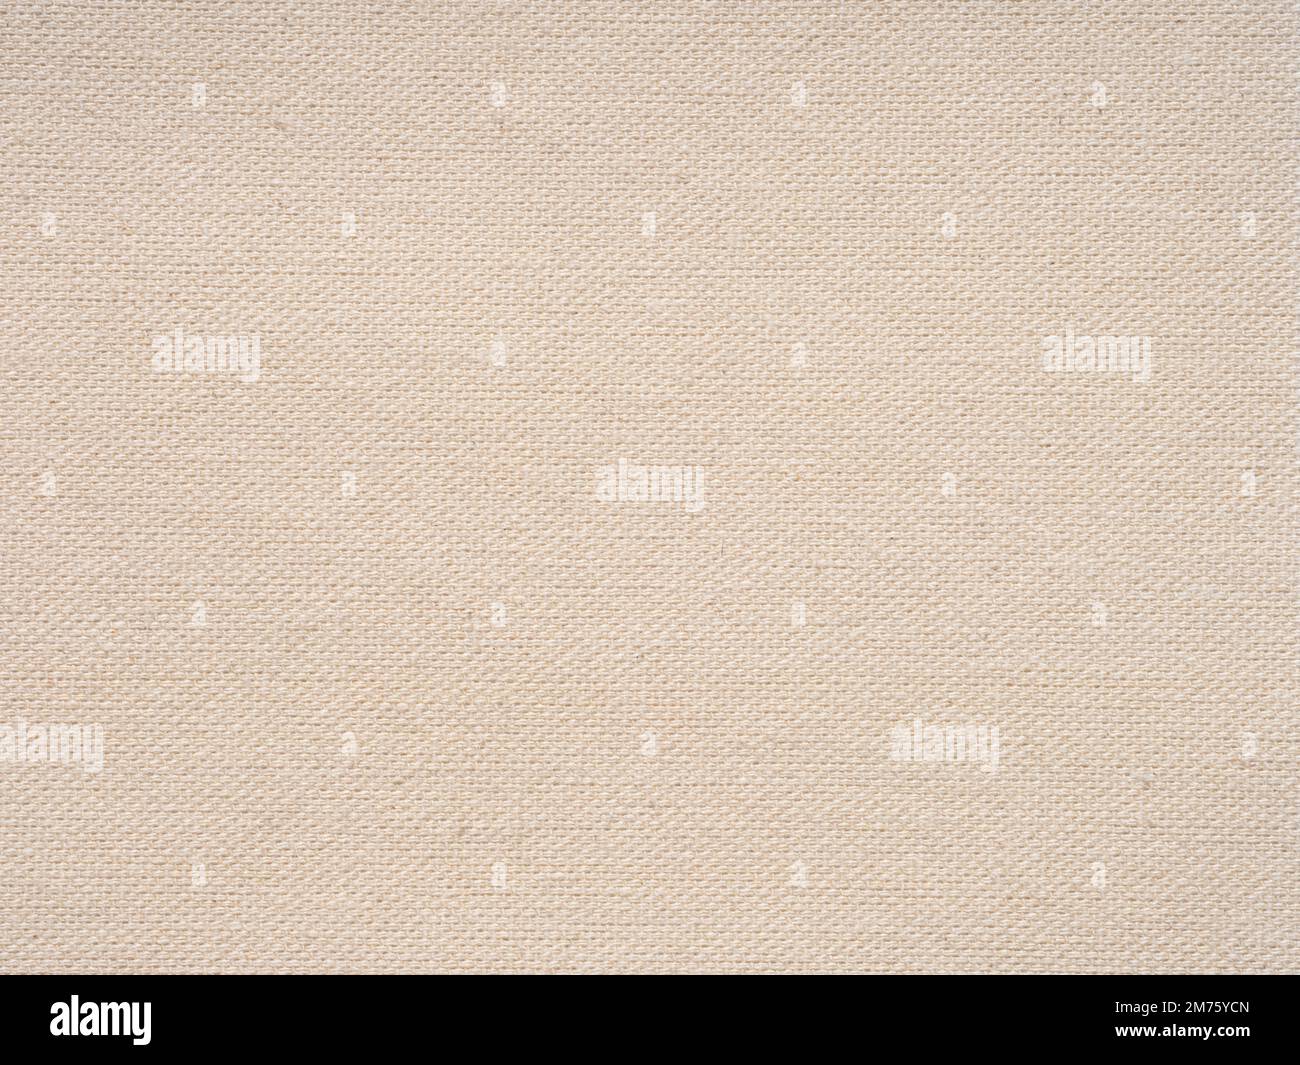 Beige vintage linen canvas texture. Stained, dirty, and distressed material for making artwork, painting, designs decoration, background concepts Stock Photo